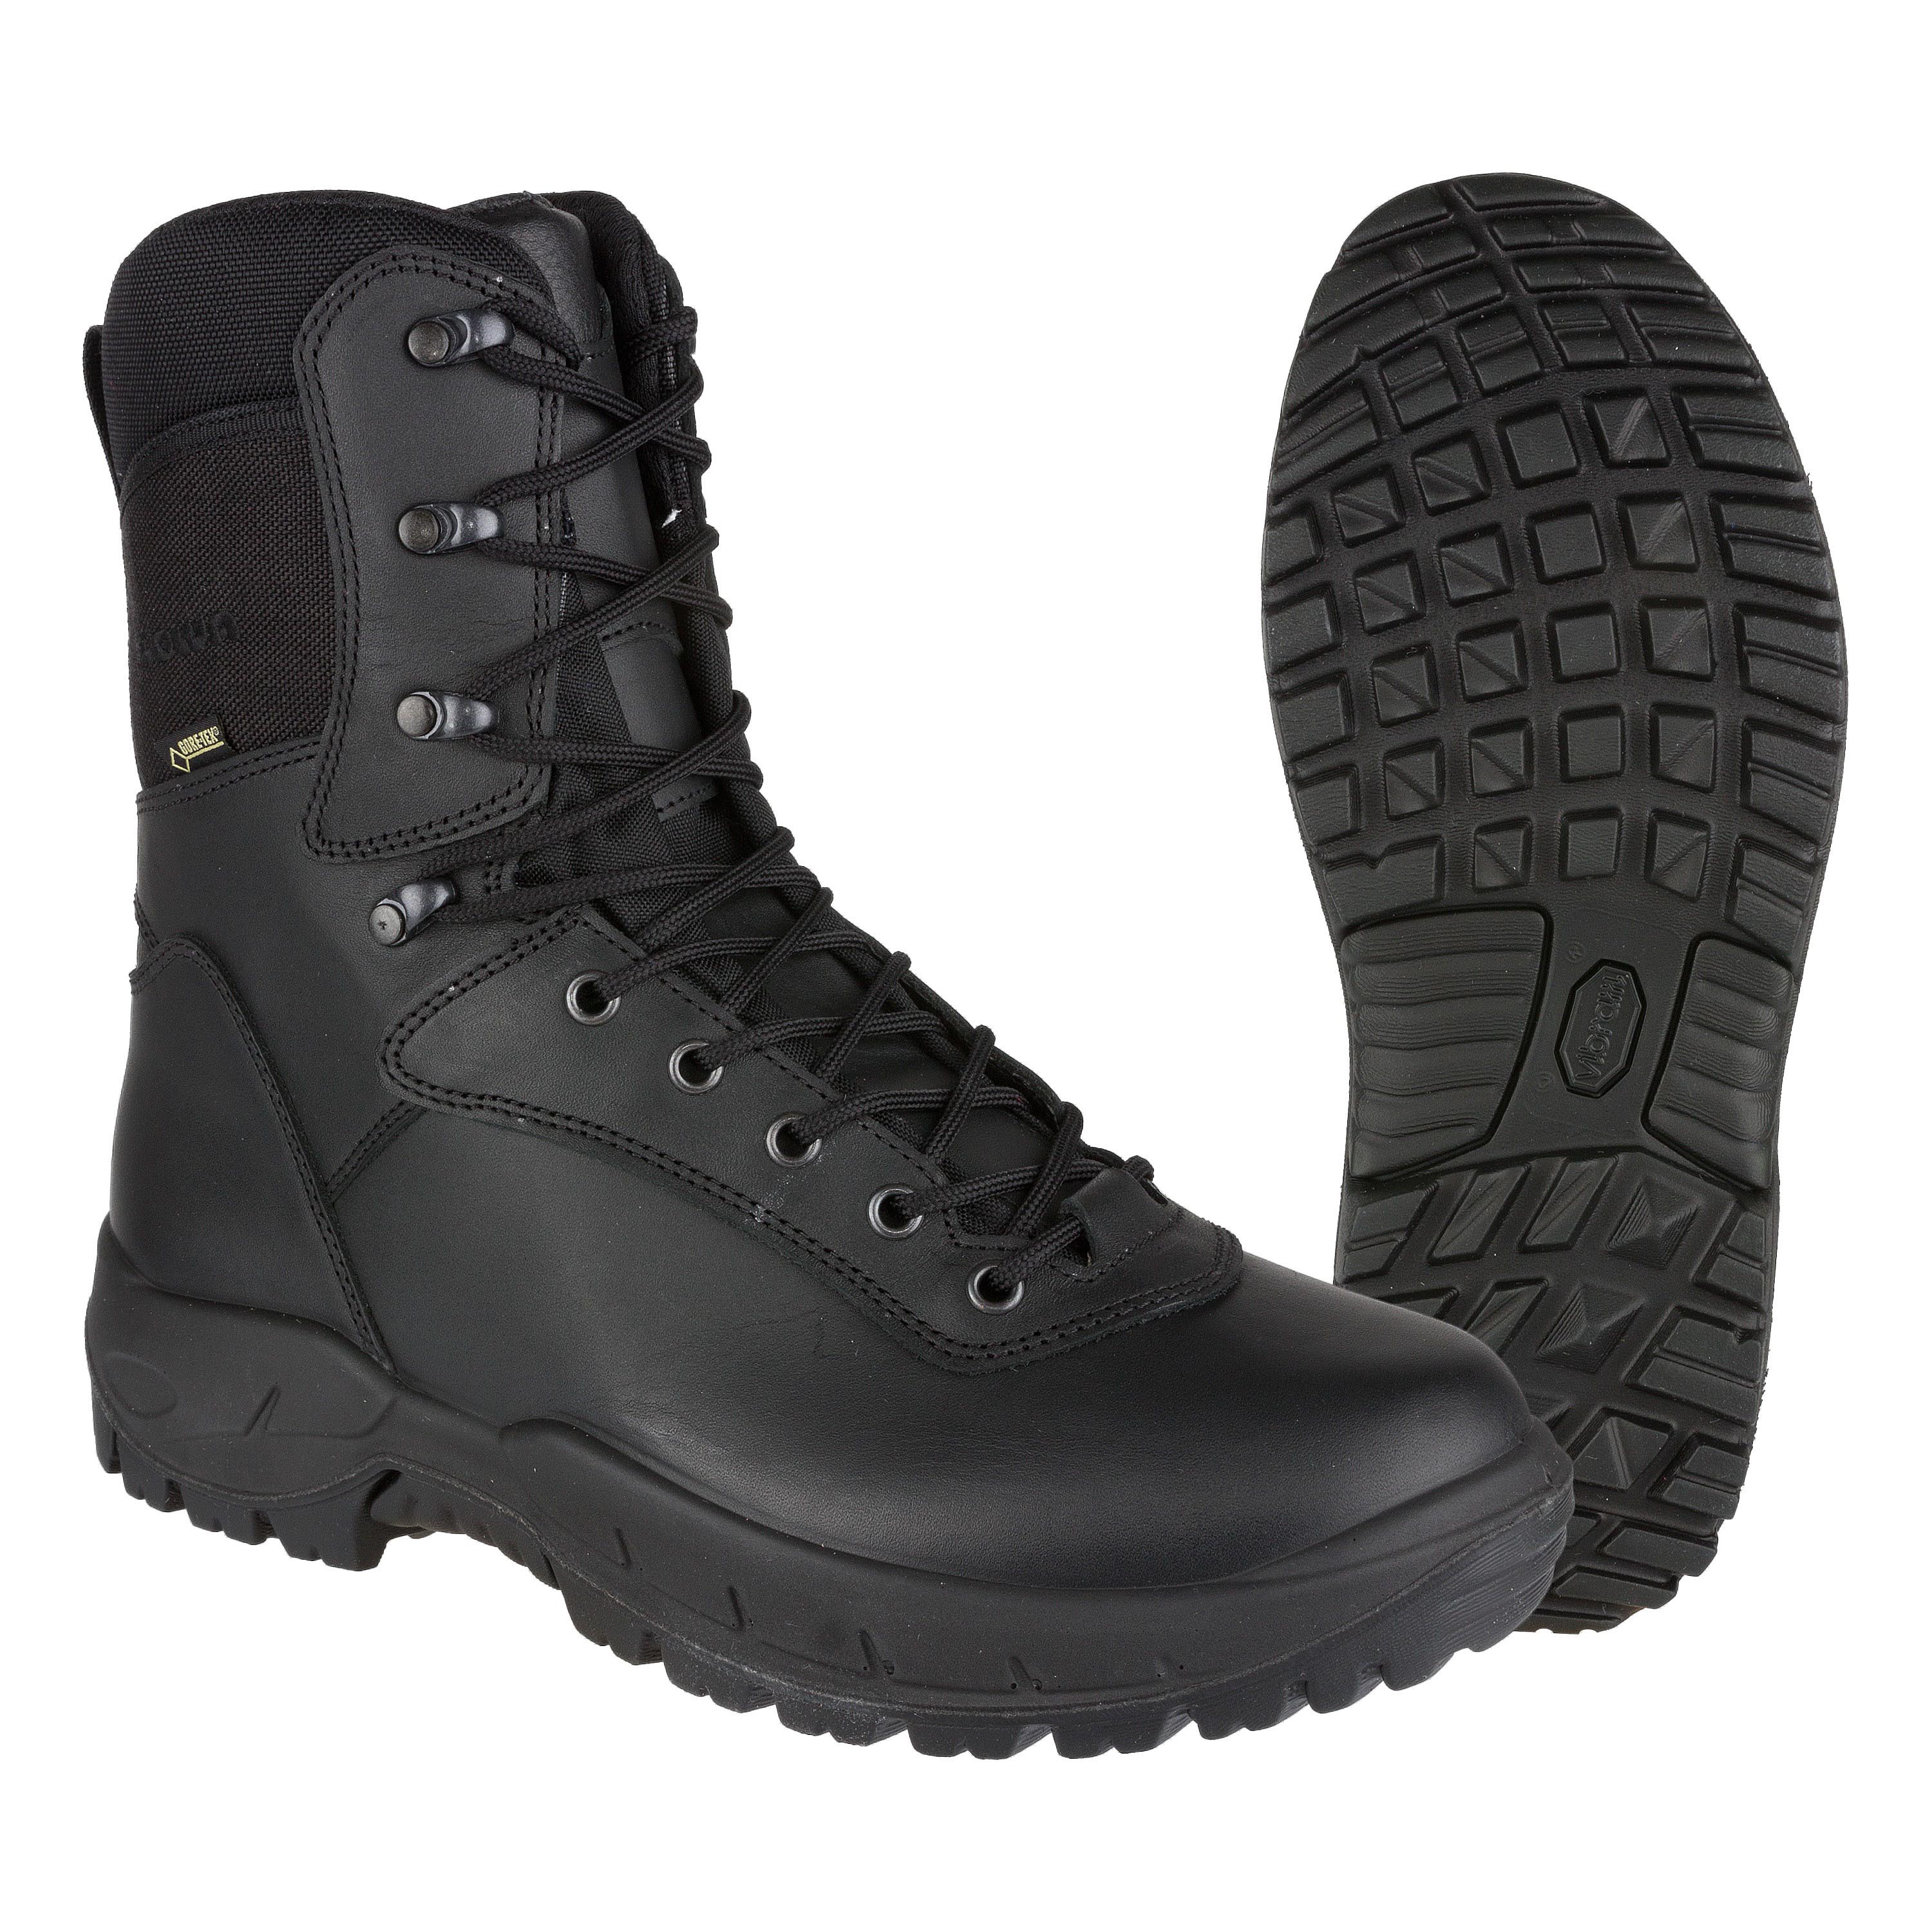 Boots LOWA Uplander GTX Thermo black | Boots LOWA Uplander GTX Thermo ...